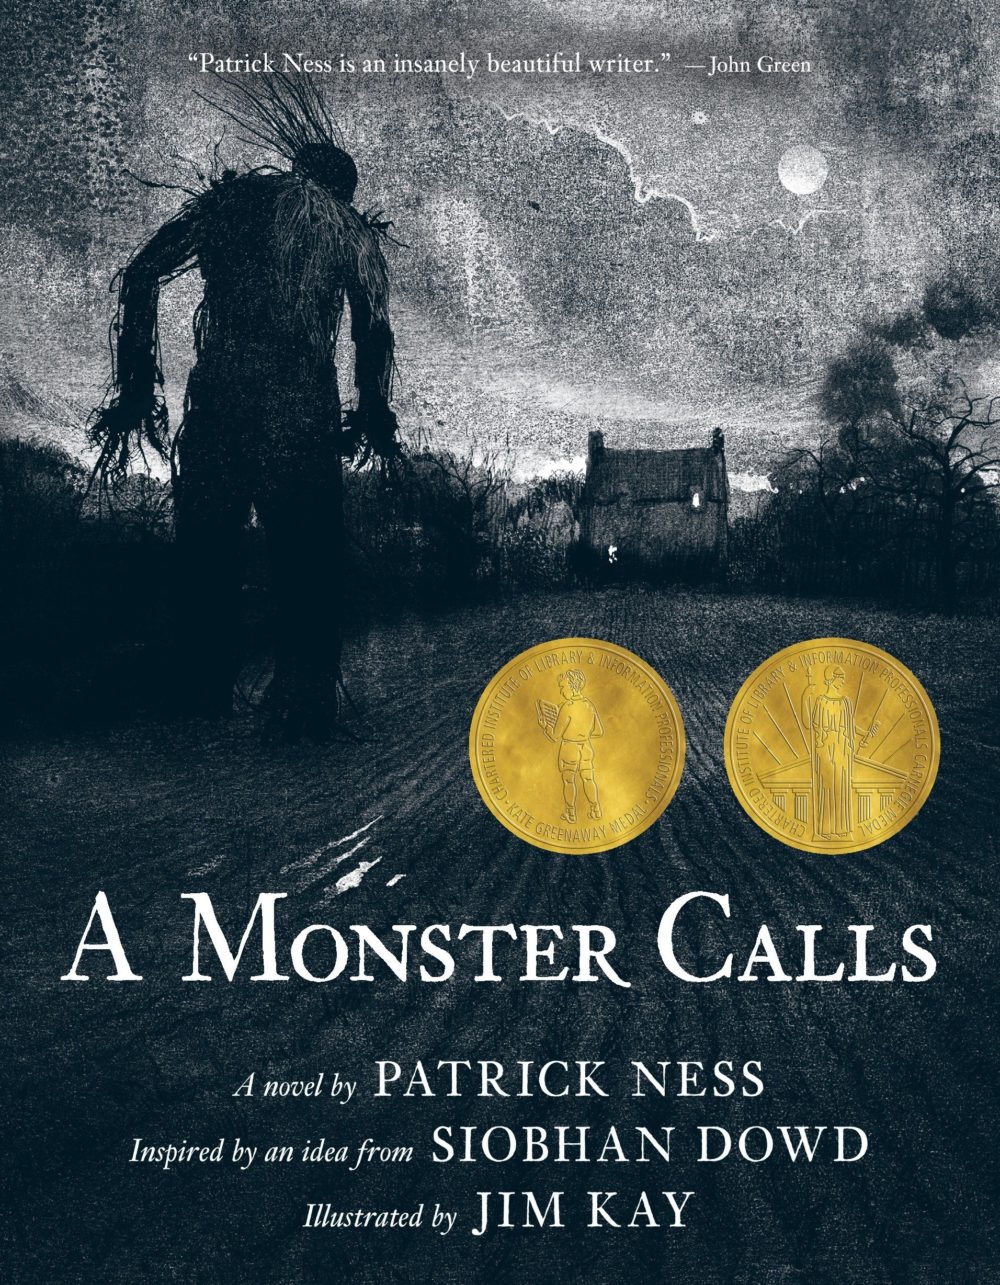 Book: A Monster Calls by Patrick Ness